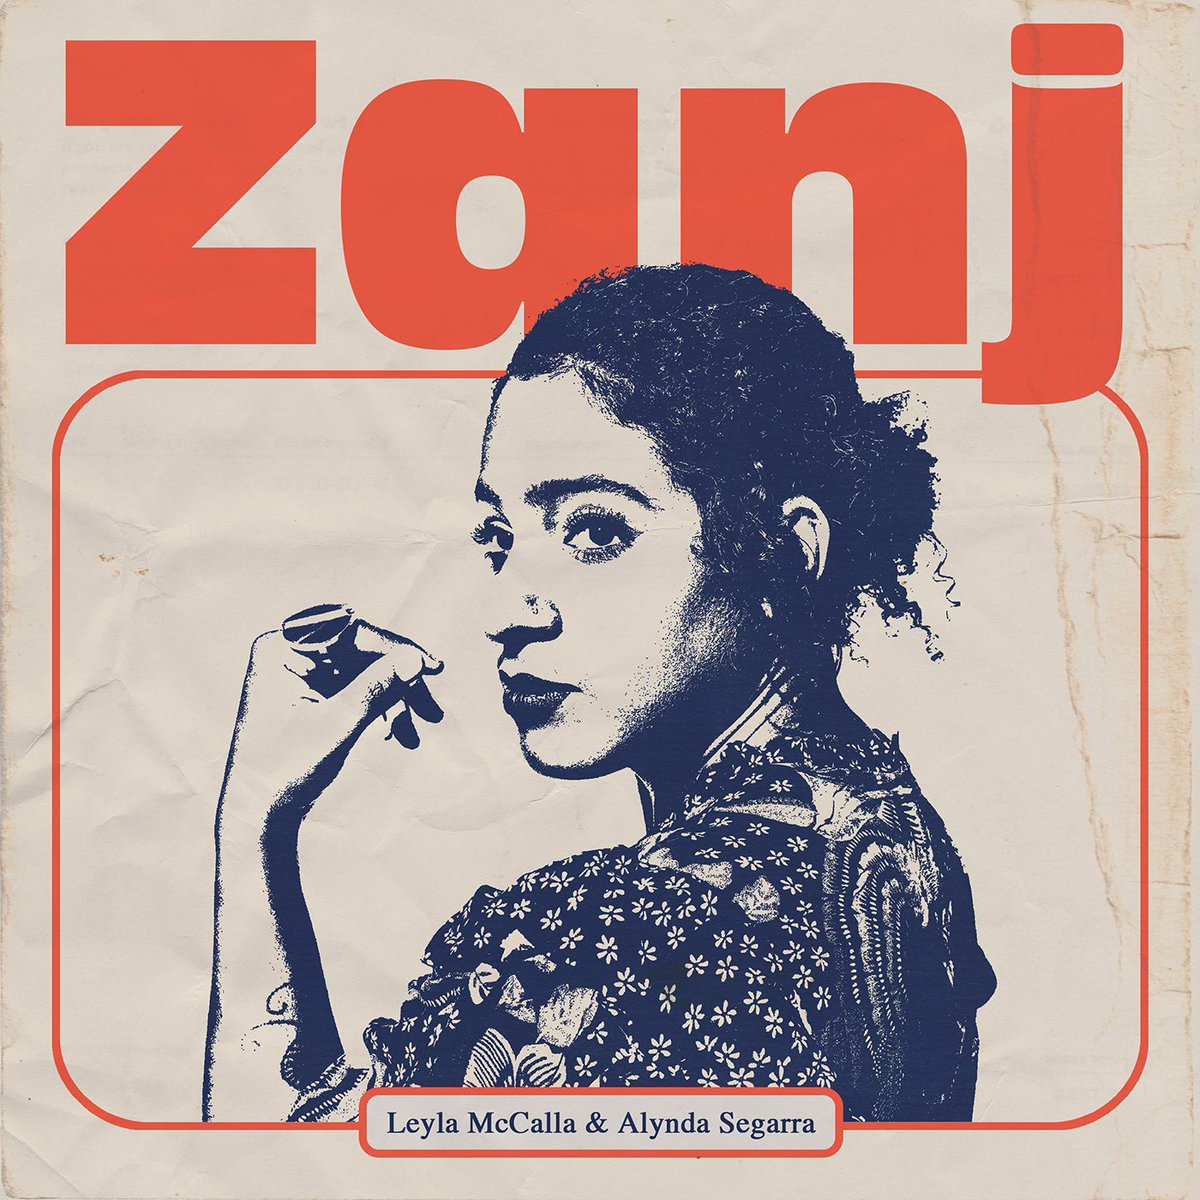 It’s my lifelong pursuit to learn songs in the catalogue of Manno Charlemagne, Haitian political protest singer & folk musician. I recorded an English version of his song “Zanj” feat. @HFTRR to introduce his music to audiences abroad. Listen @AntiRecords: leylamccalla.ffm.to/zanj